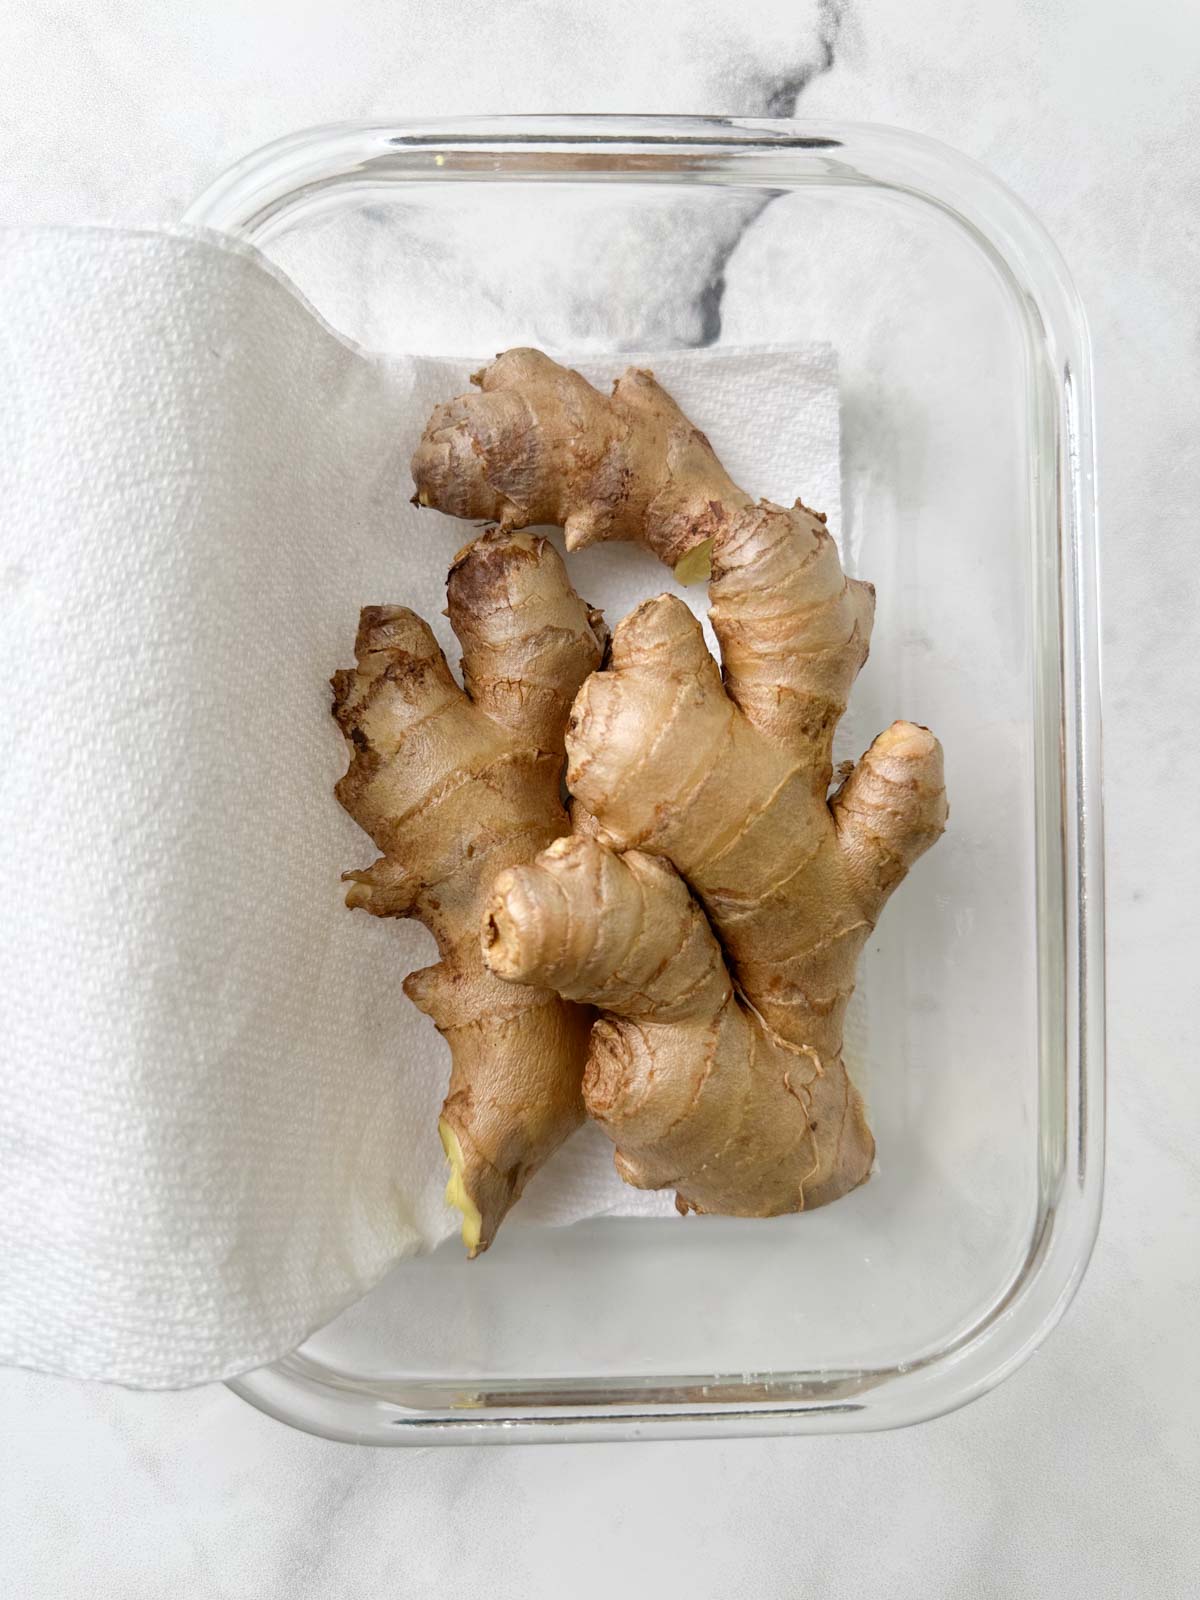 ginger root in a paper towel lined airtight container